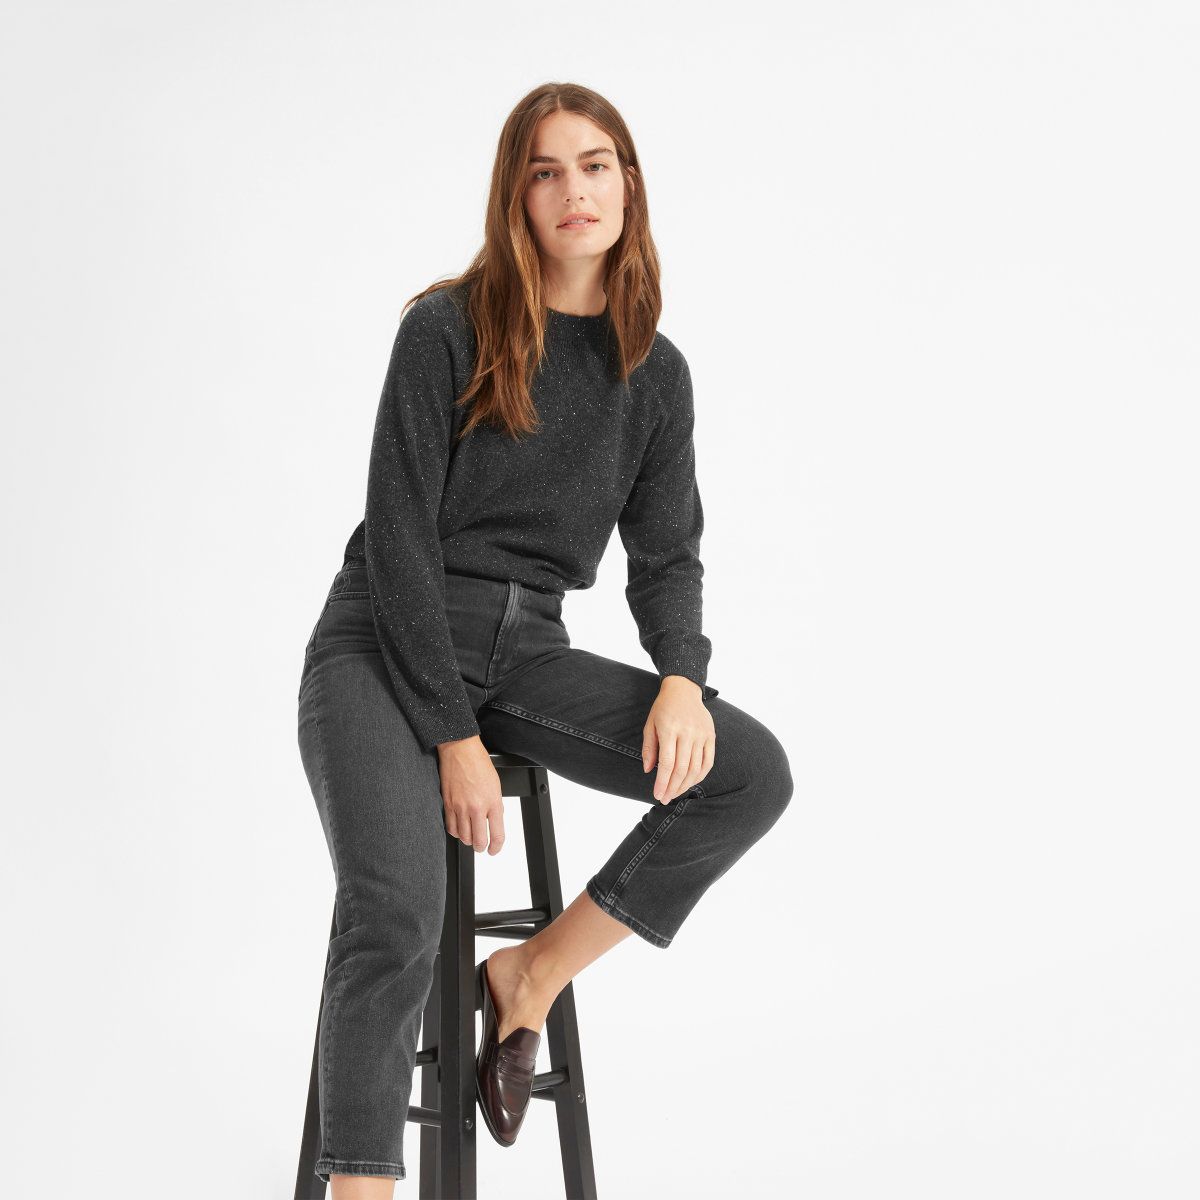 The Cheeky Straight Ankle Jean | Everlane